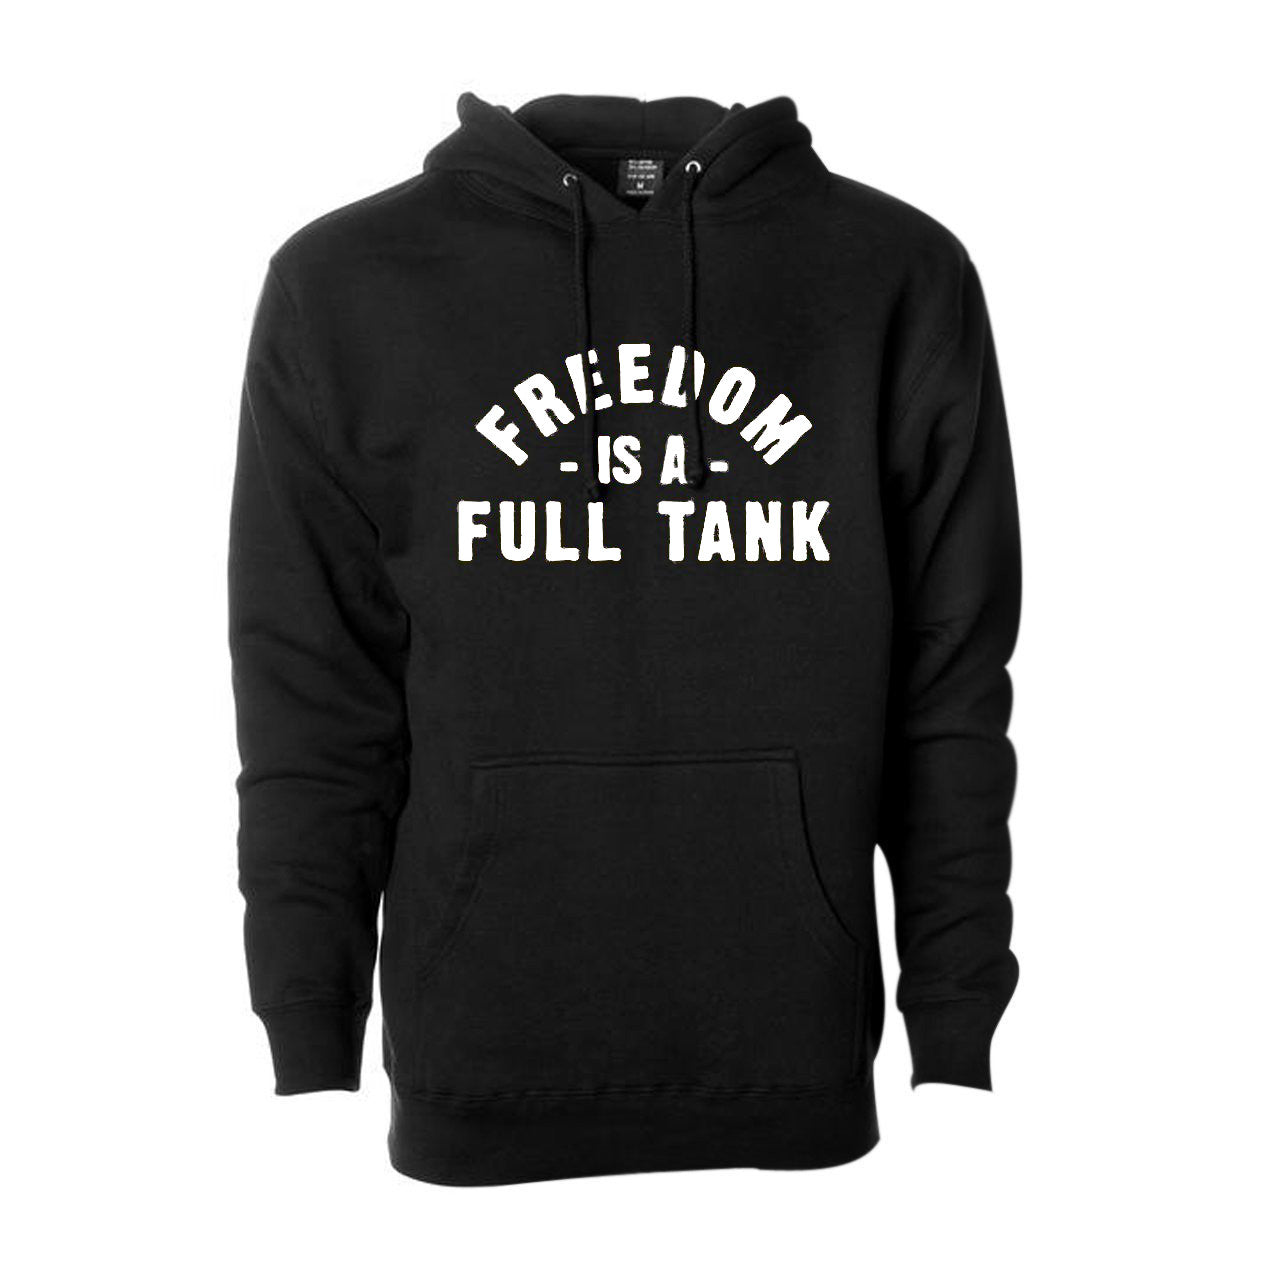 Lords x Freedom Is A Full Tank Premium Sweatsuit Hoodie